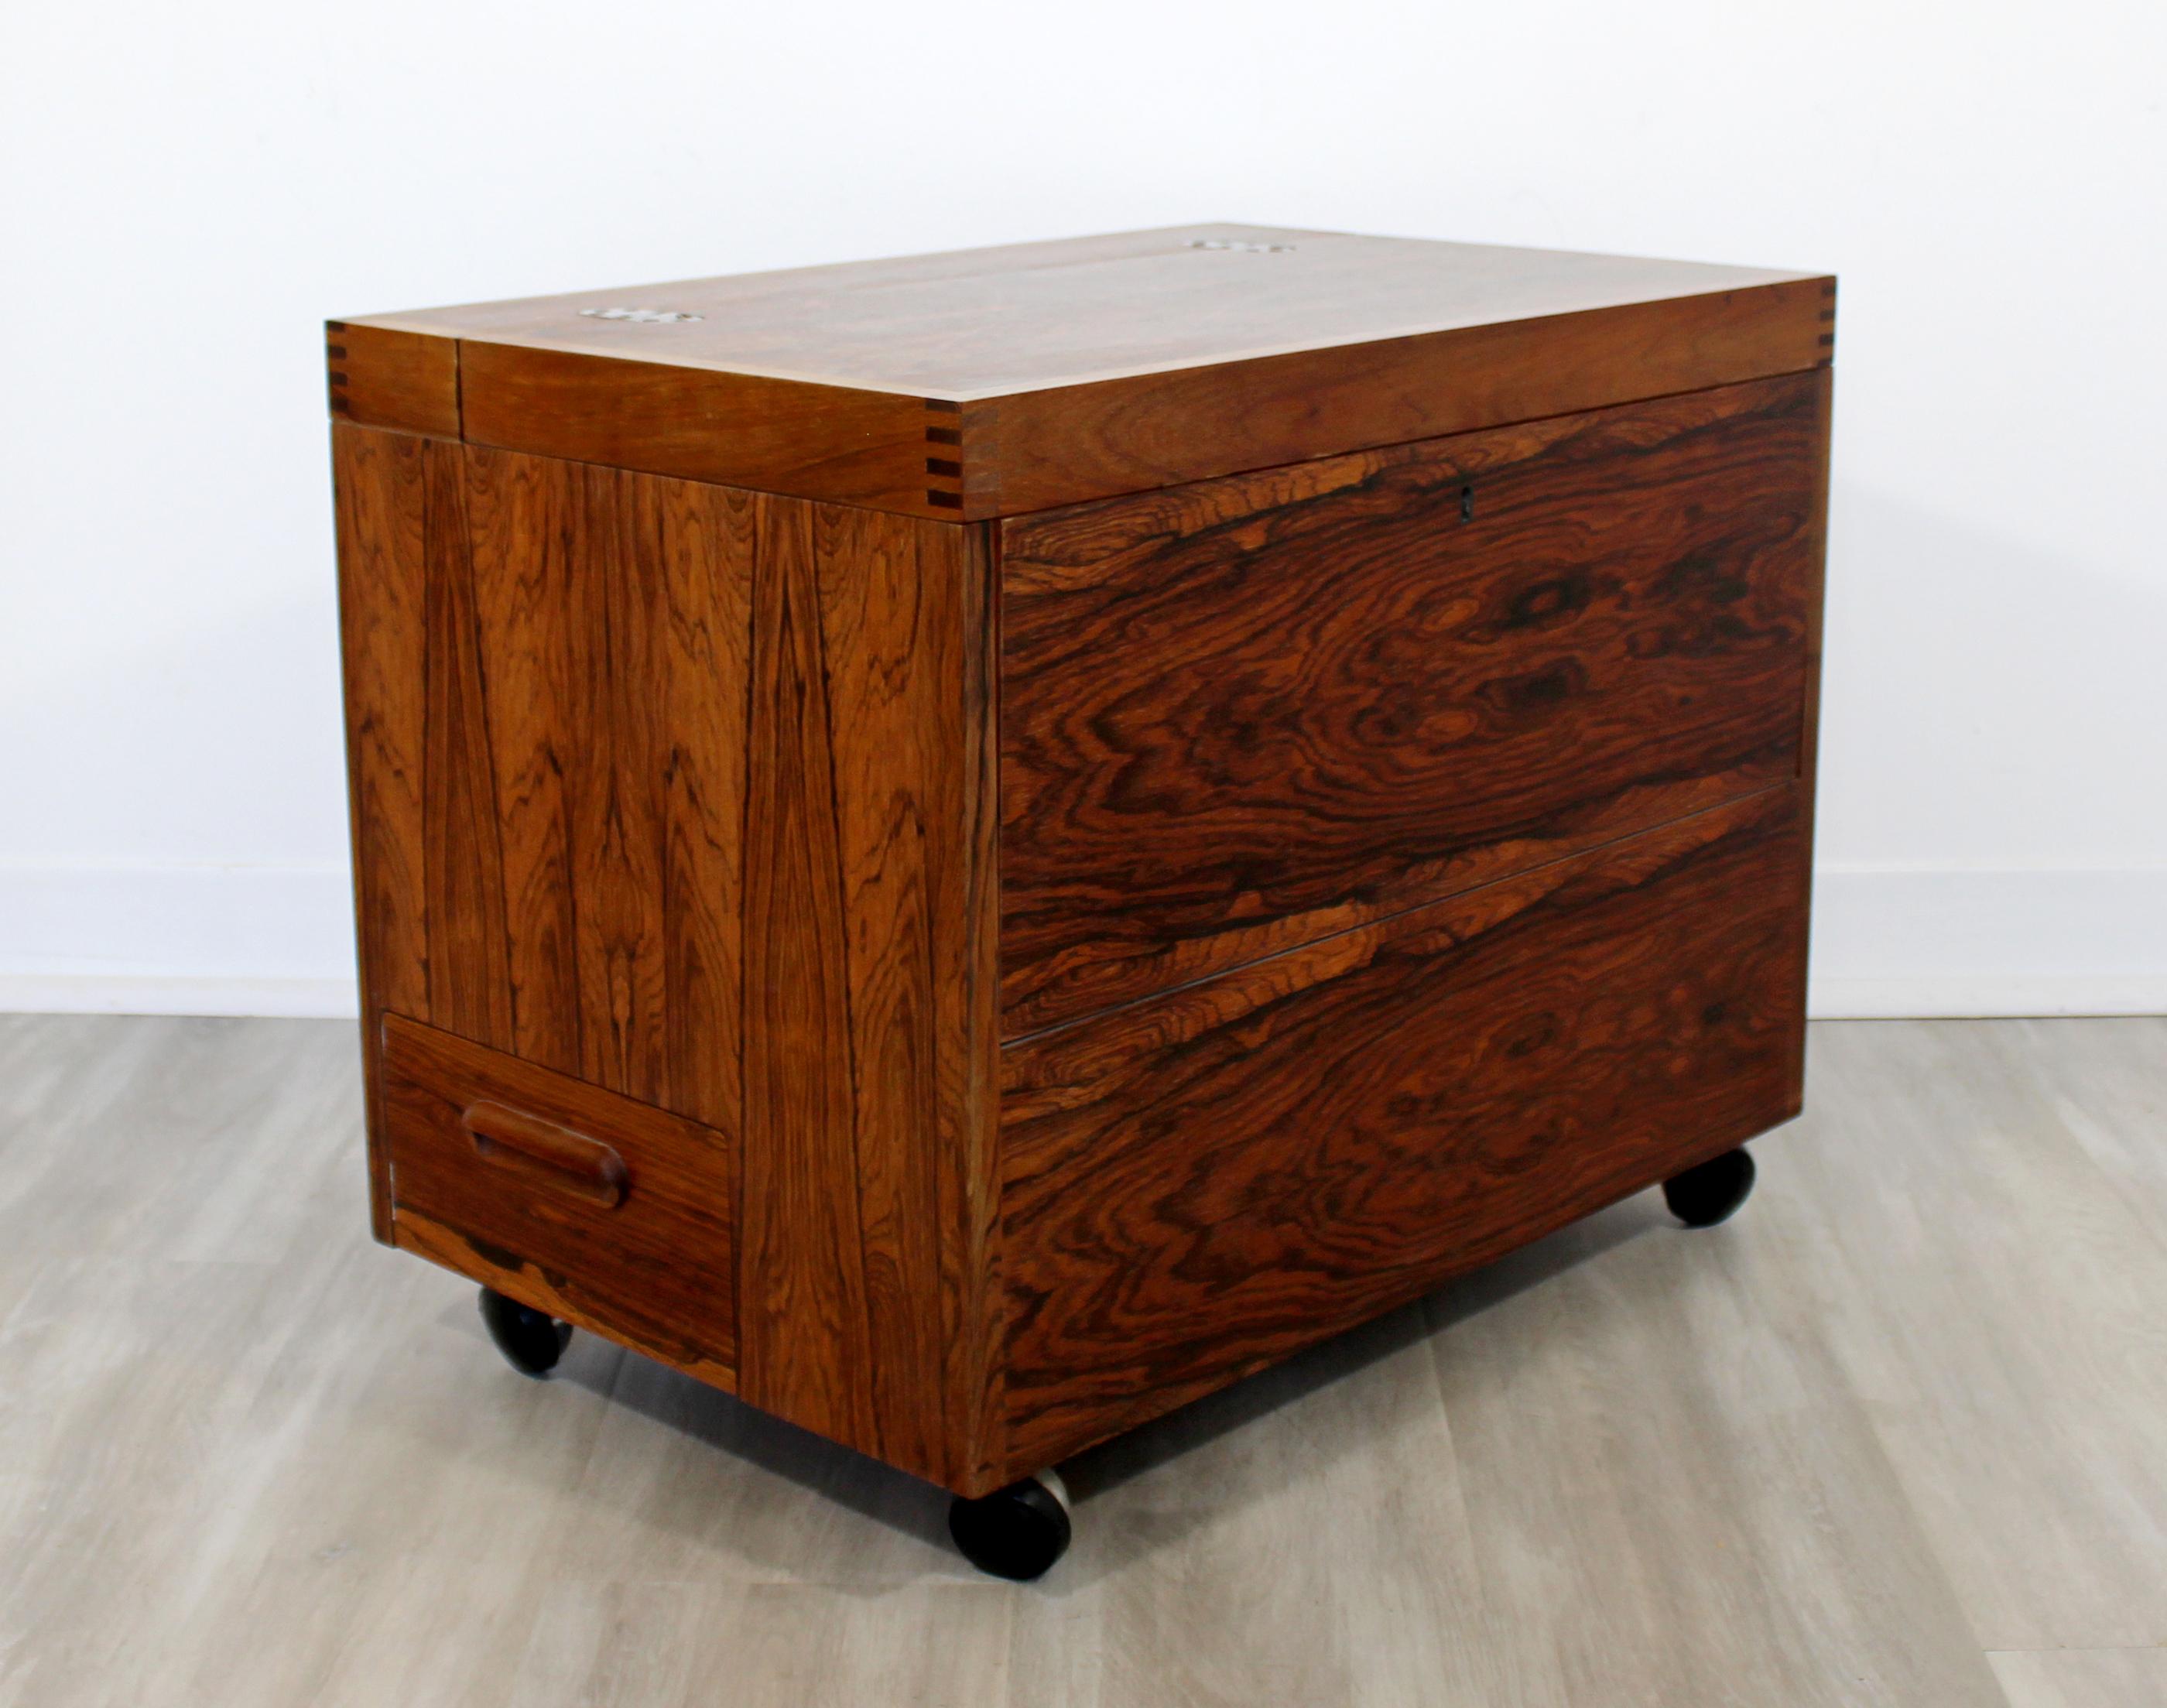 For your consideration is an incredible, cube mini bar, or side table with compartments, made of rosewood and with brass hinges, on casters, designed by Rolf Hesland and crafted by Haug Snekkeri, circa the 1960s. In very good vintage condition. The